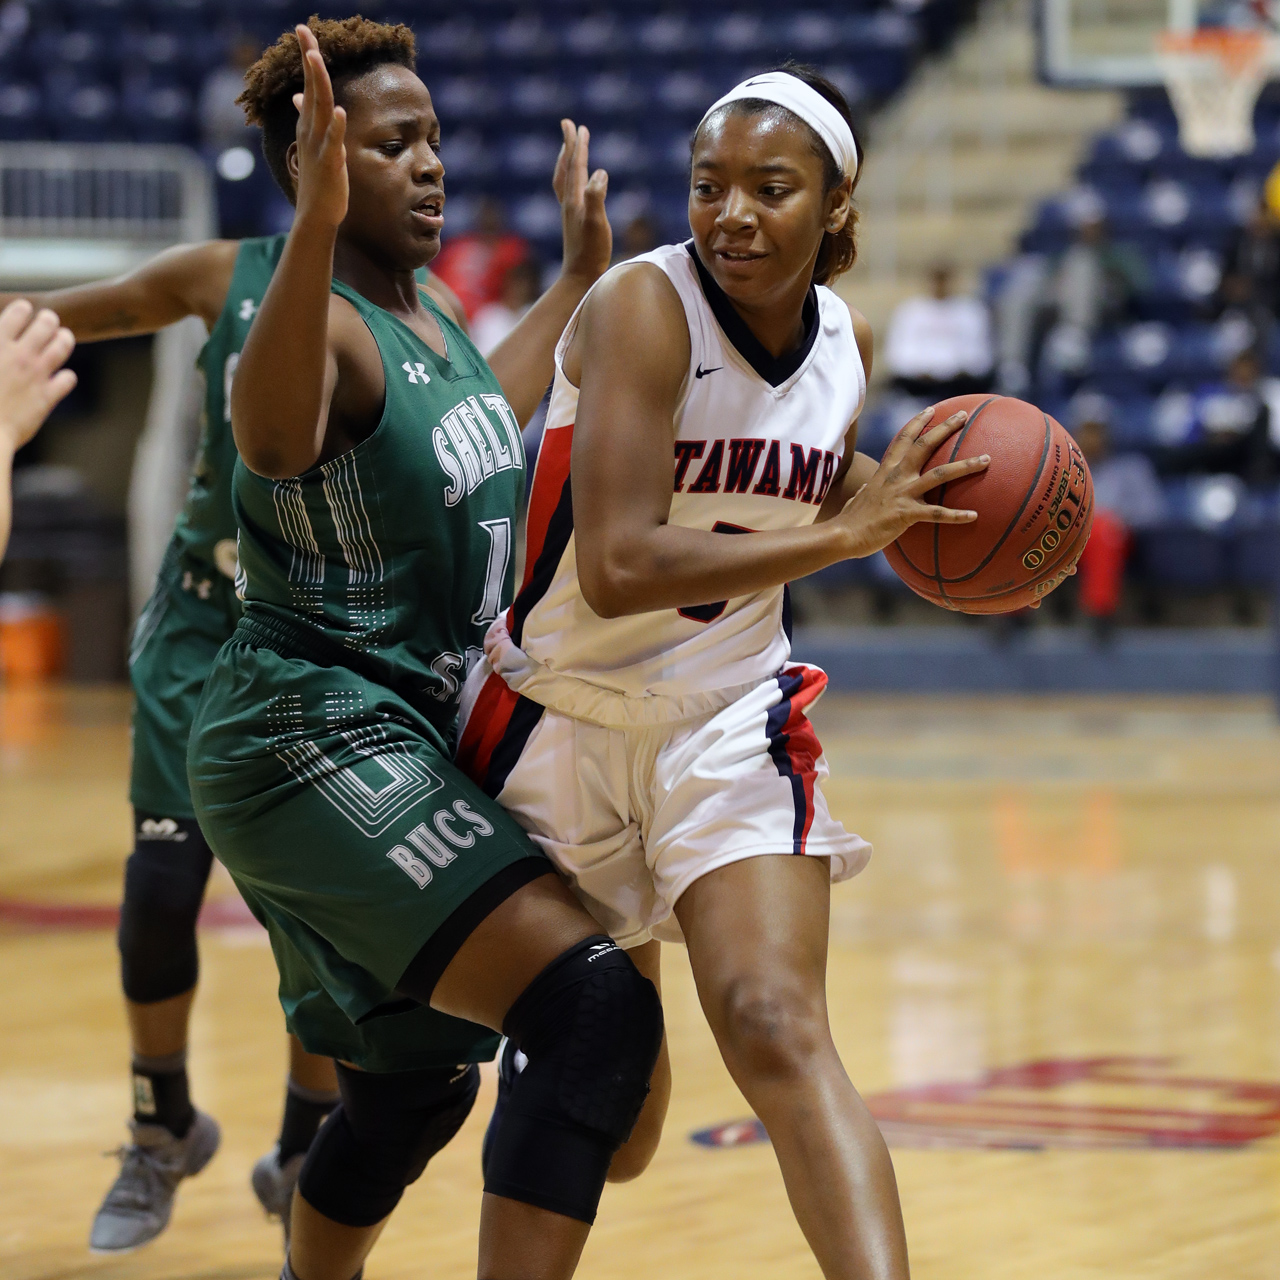 Lady Indians rolls to 79-47 win at Baton Rouge